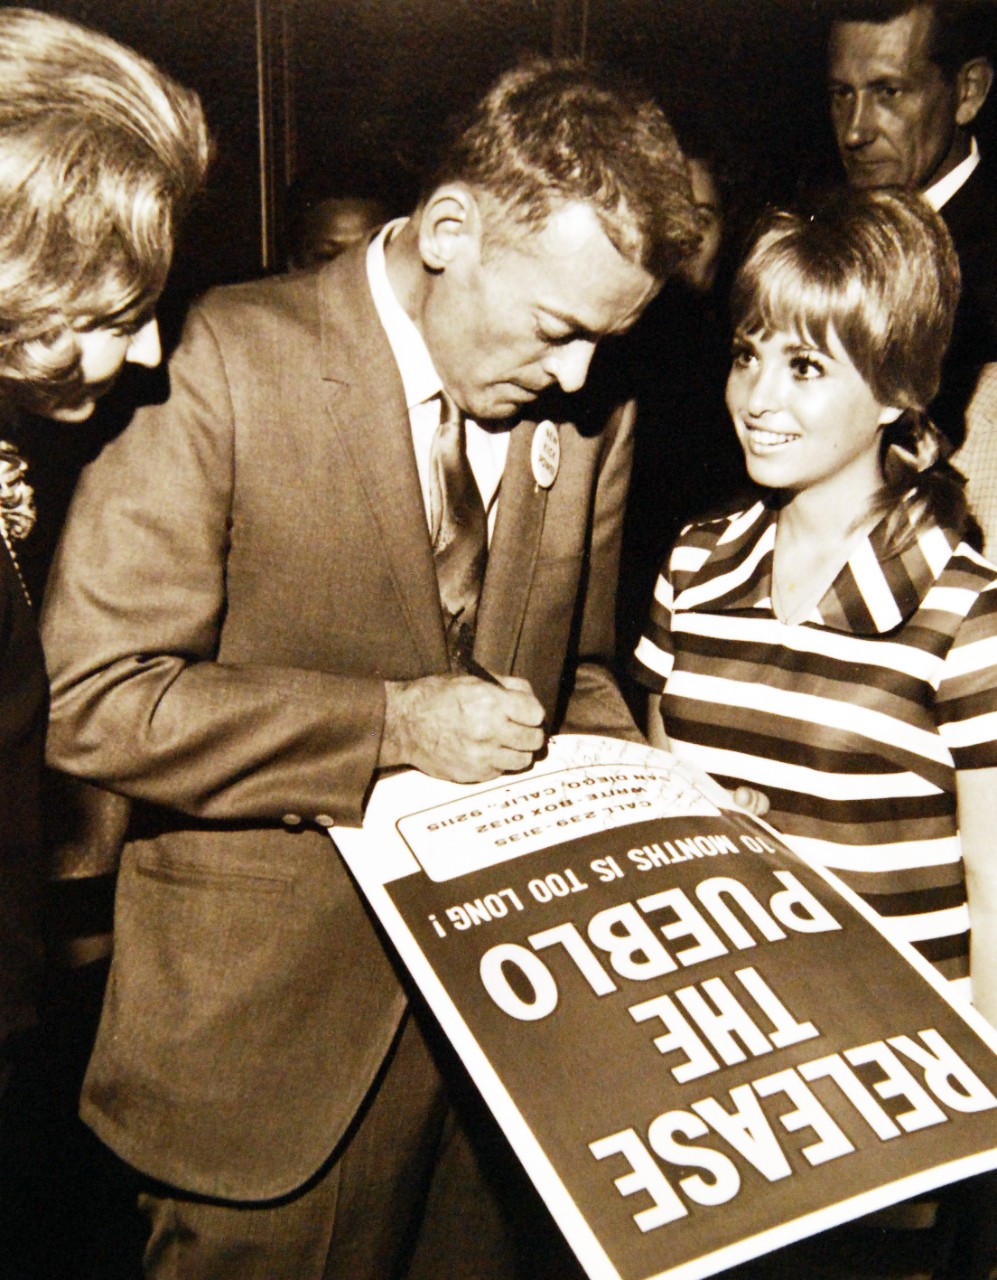 428-GX-USN-1140174:   San Diego, California, January 12, 1969.   Commander Lloyd M. Bucher, Commanding Officer of USS Pueblo (AGER-2), signs an autograph for a Hollywood starlet on a “Release the Pueblo” poster during a part at the La Baron Hotel.  Mrs. Bucher is at left.  Photographed by PH1 Robert E. Woods.   Official U.S. Navy Photograph, now in the collections of the National Archives.  (2017/05/23).  Photographed from reference card.  